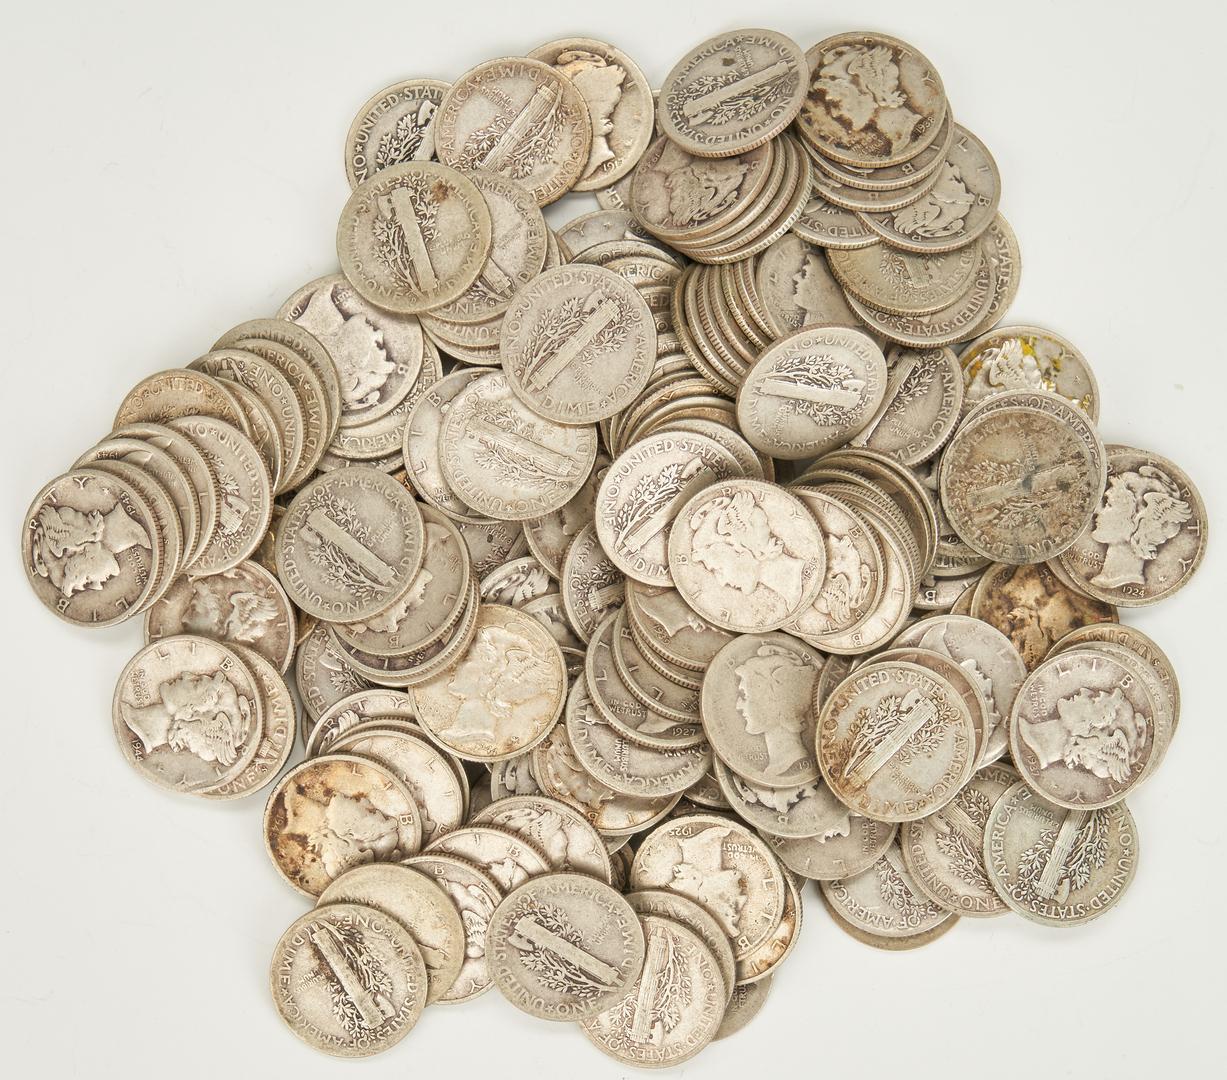 Lot 738: Silver Coin Grouping of 447 items, incl. Dimes, Quarters, and Halves